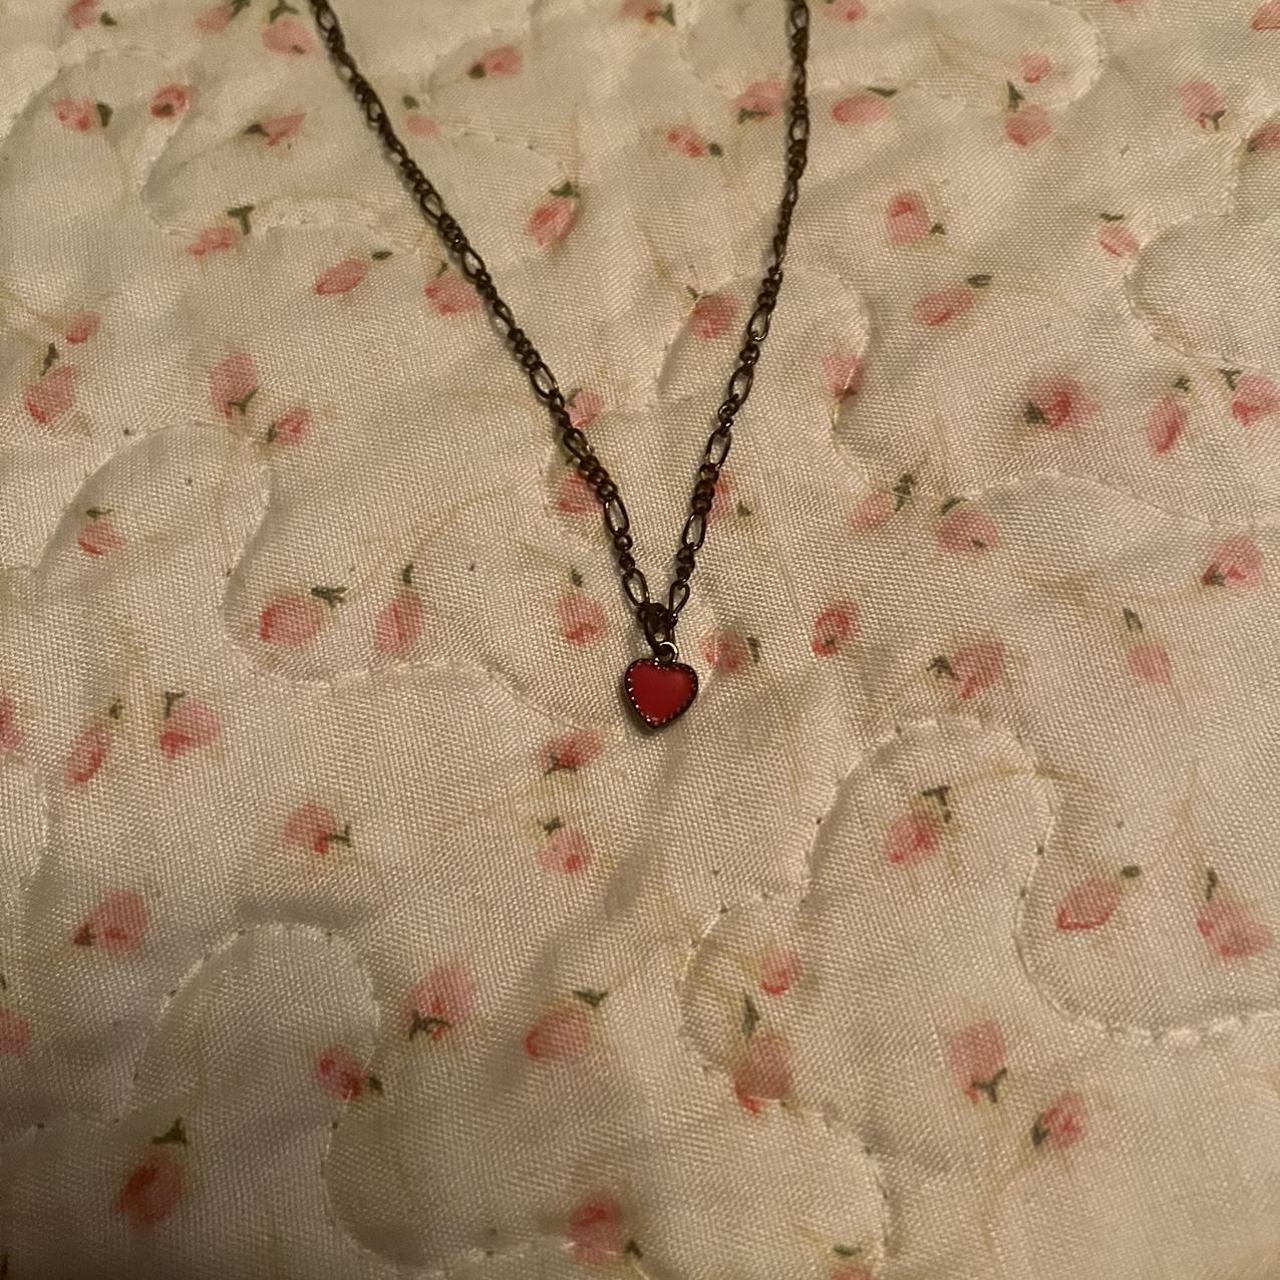 Brandy Melville Heart Necklace Red - $6 - From Rachael